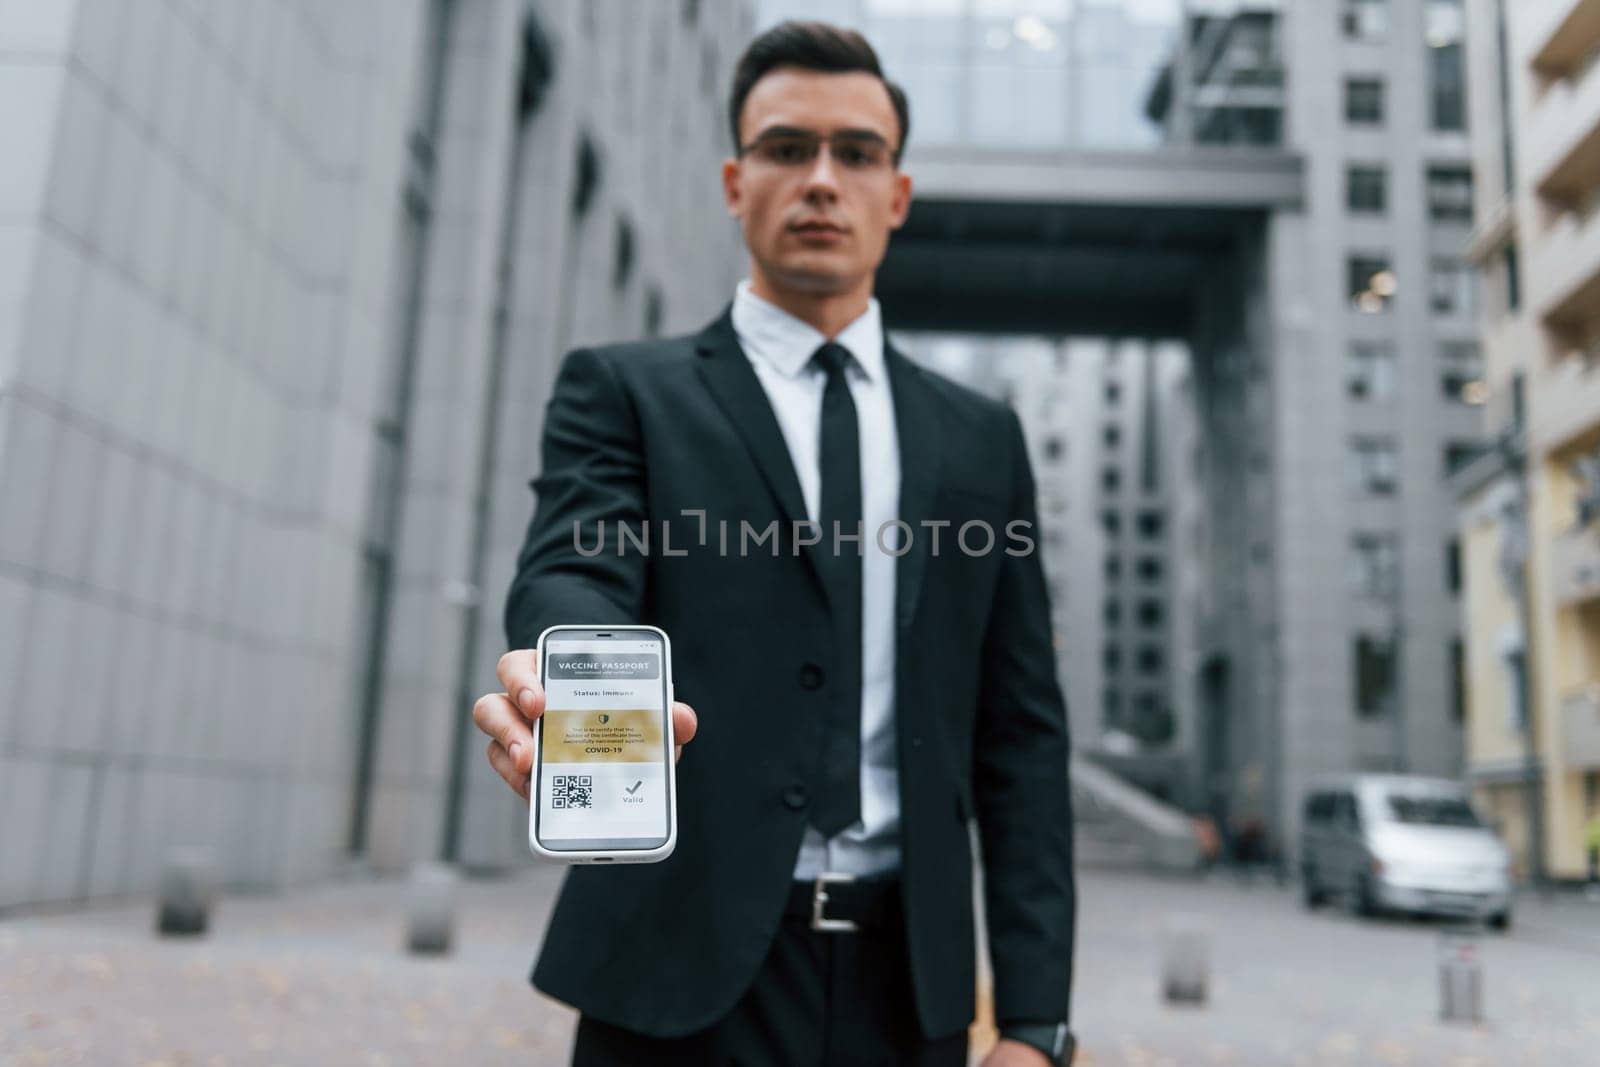 Holding phone with vaccination certificate. Businessman in black suit and tie is outdoors in the city.